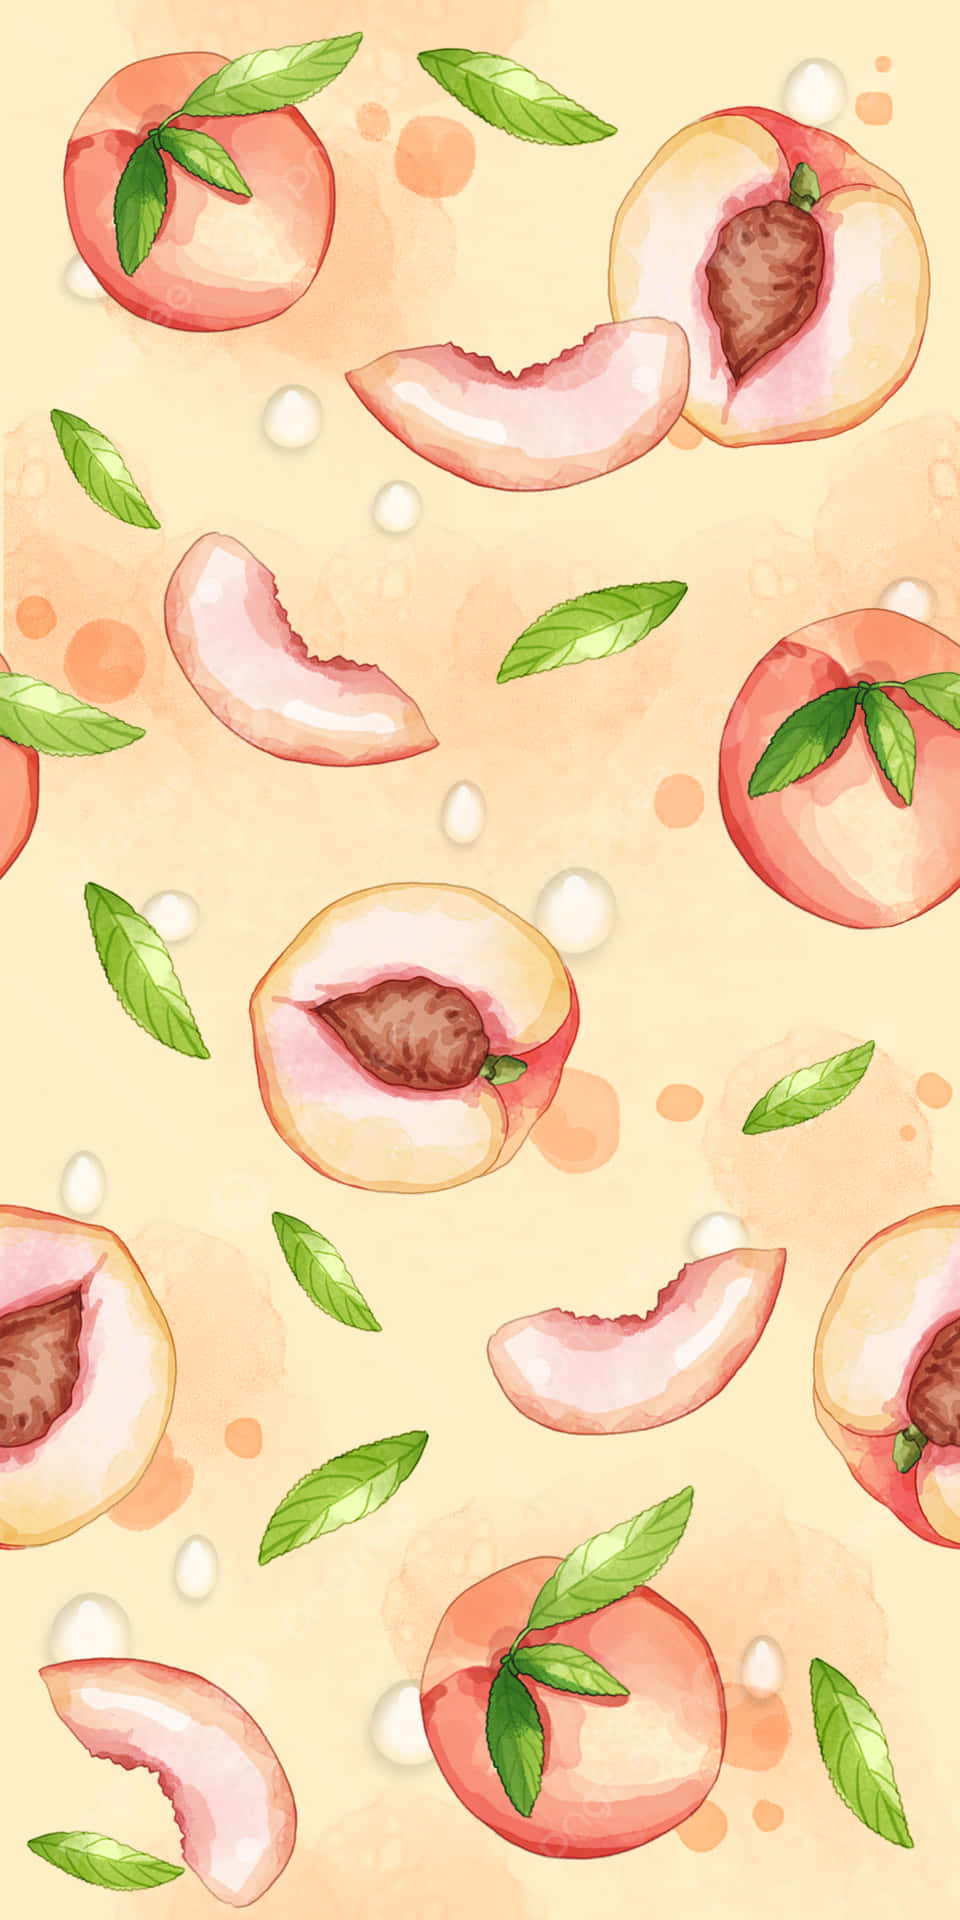 Cute Peach Slices And Leaves Pattern Wallpaper